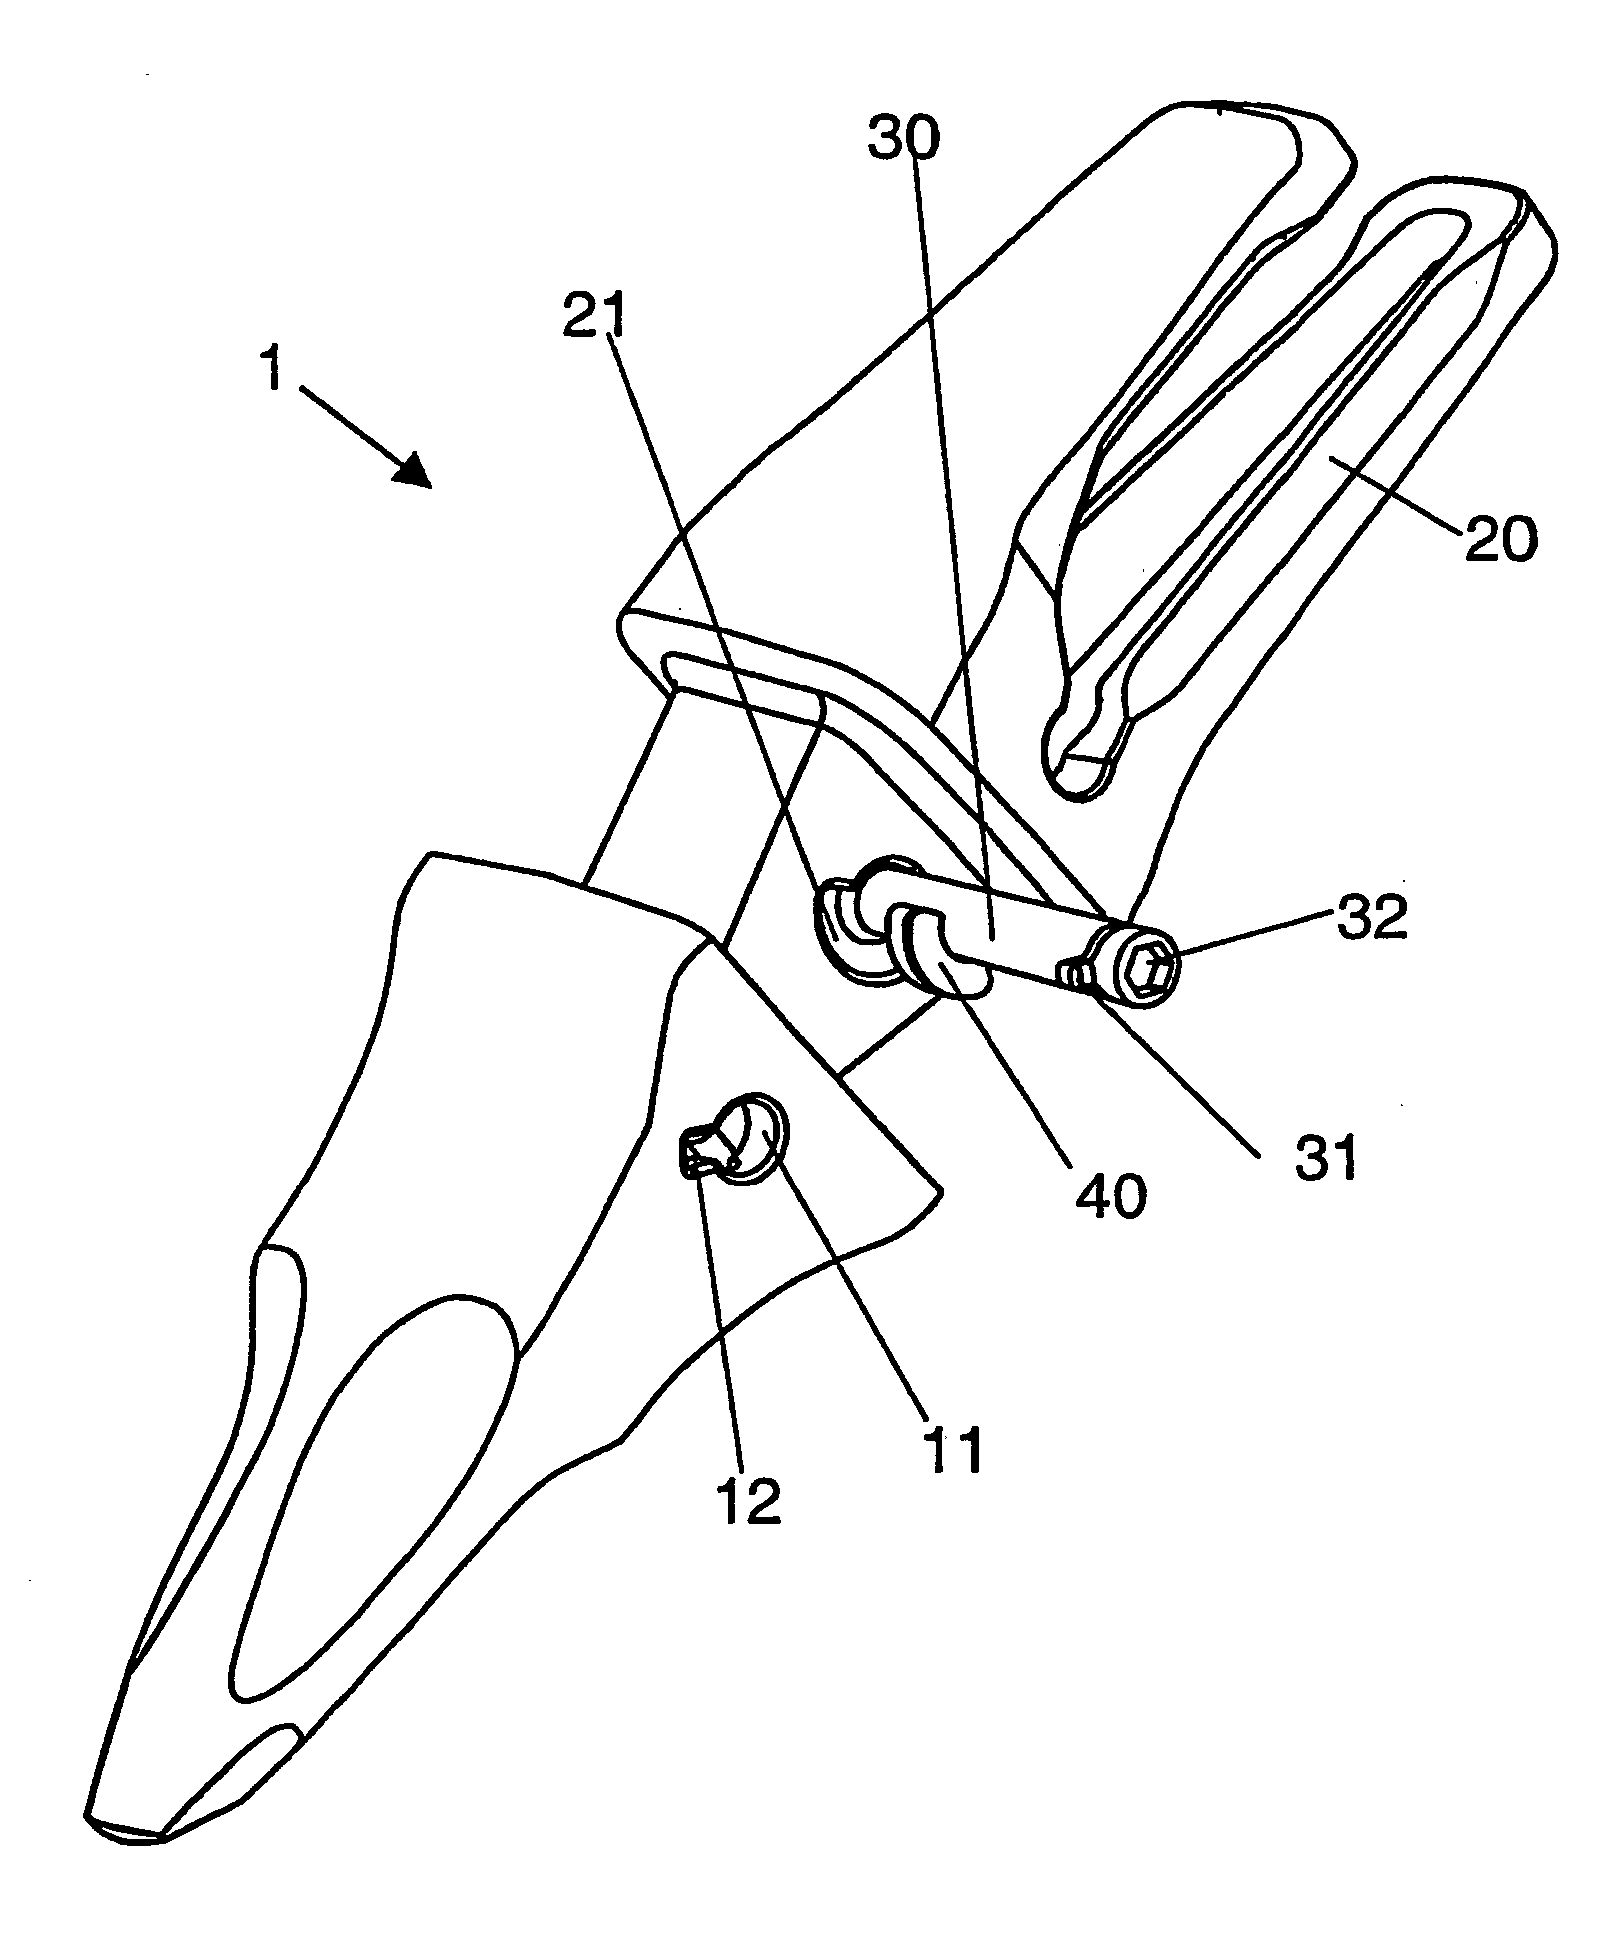 Removable device for attaching two mechanical parts